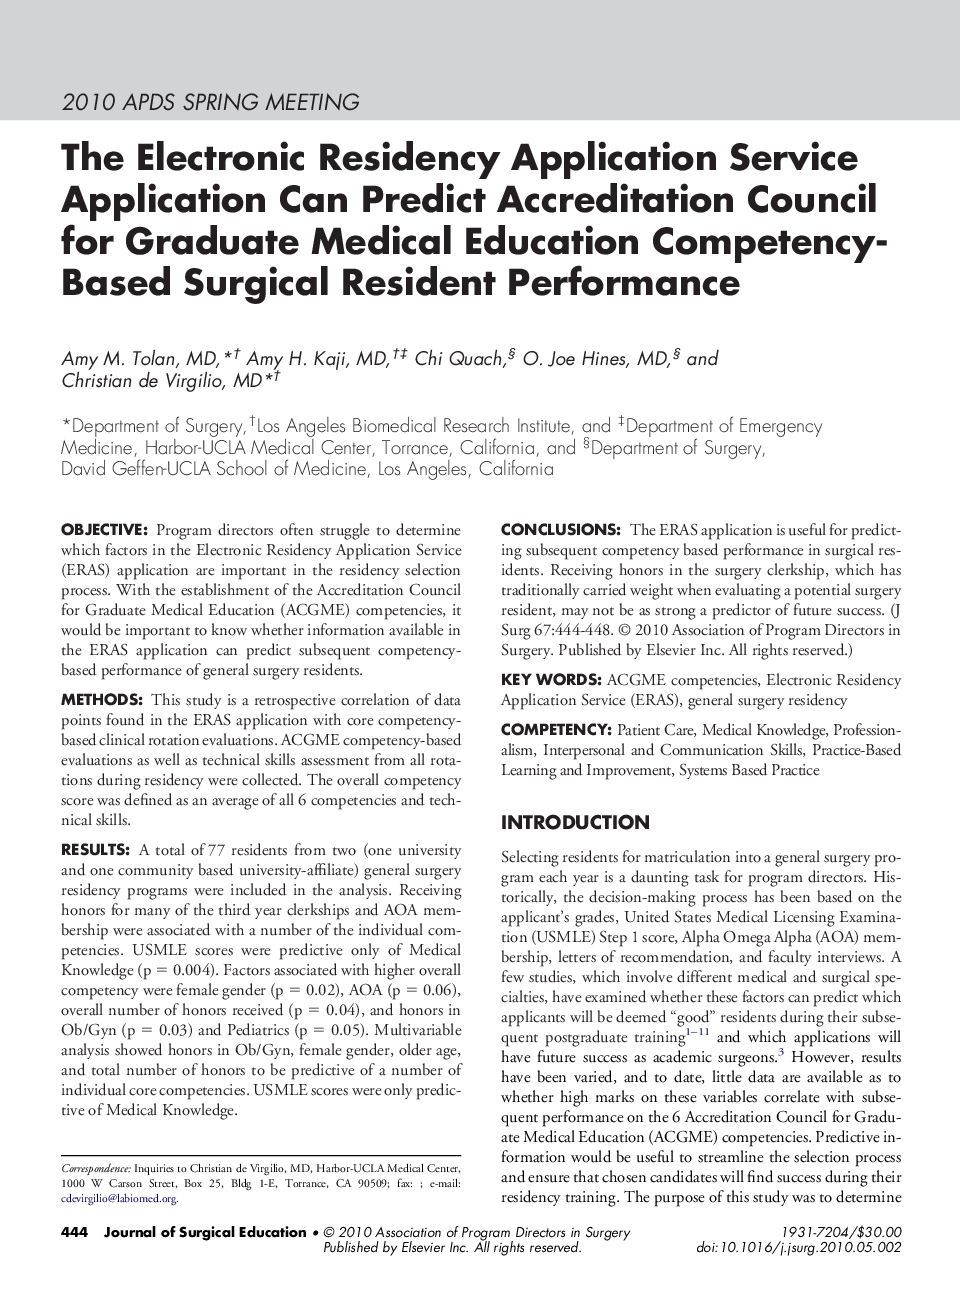 The Electronic Residency Application Service Application Can Predict Accreditation Council for Graduate Medical Education Competency-Based Surgical Resident Performance